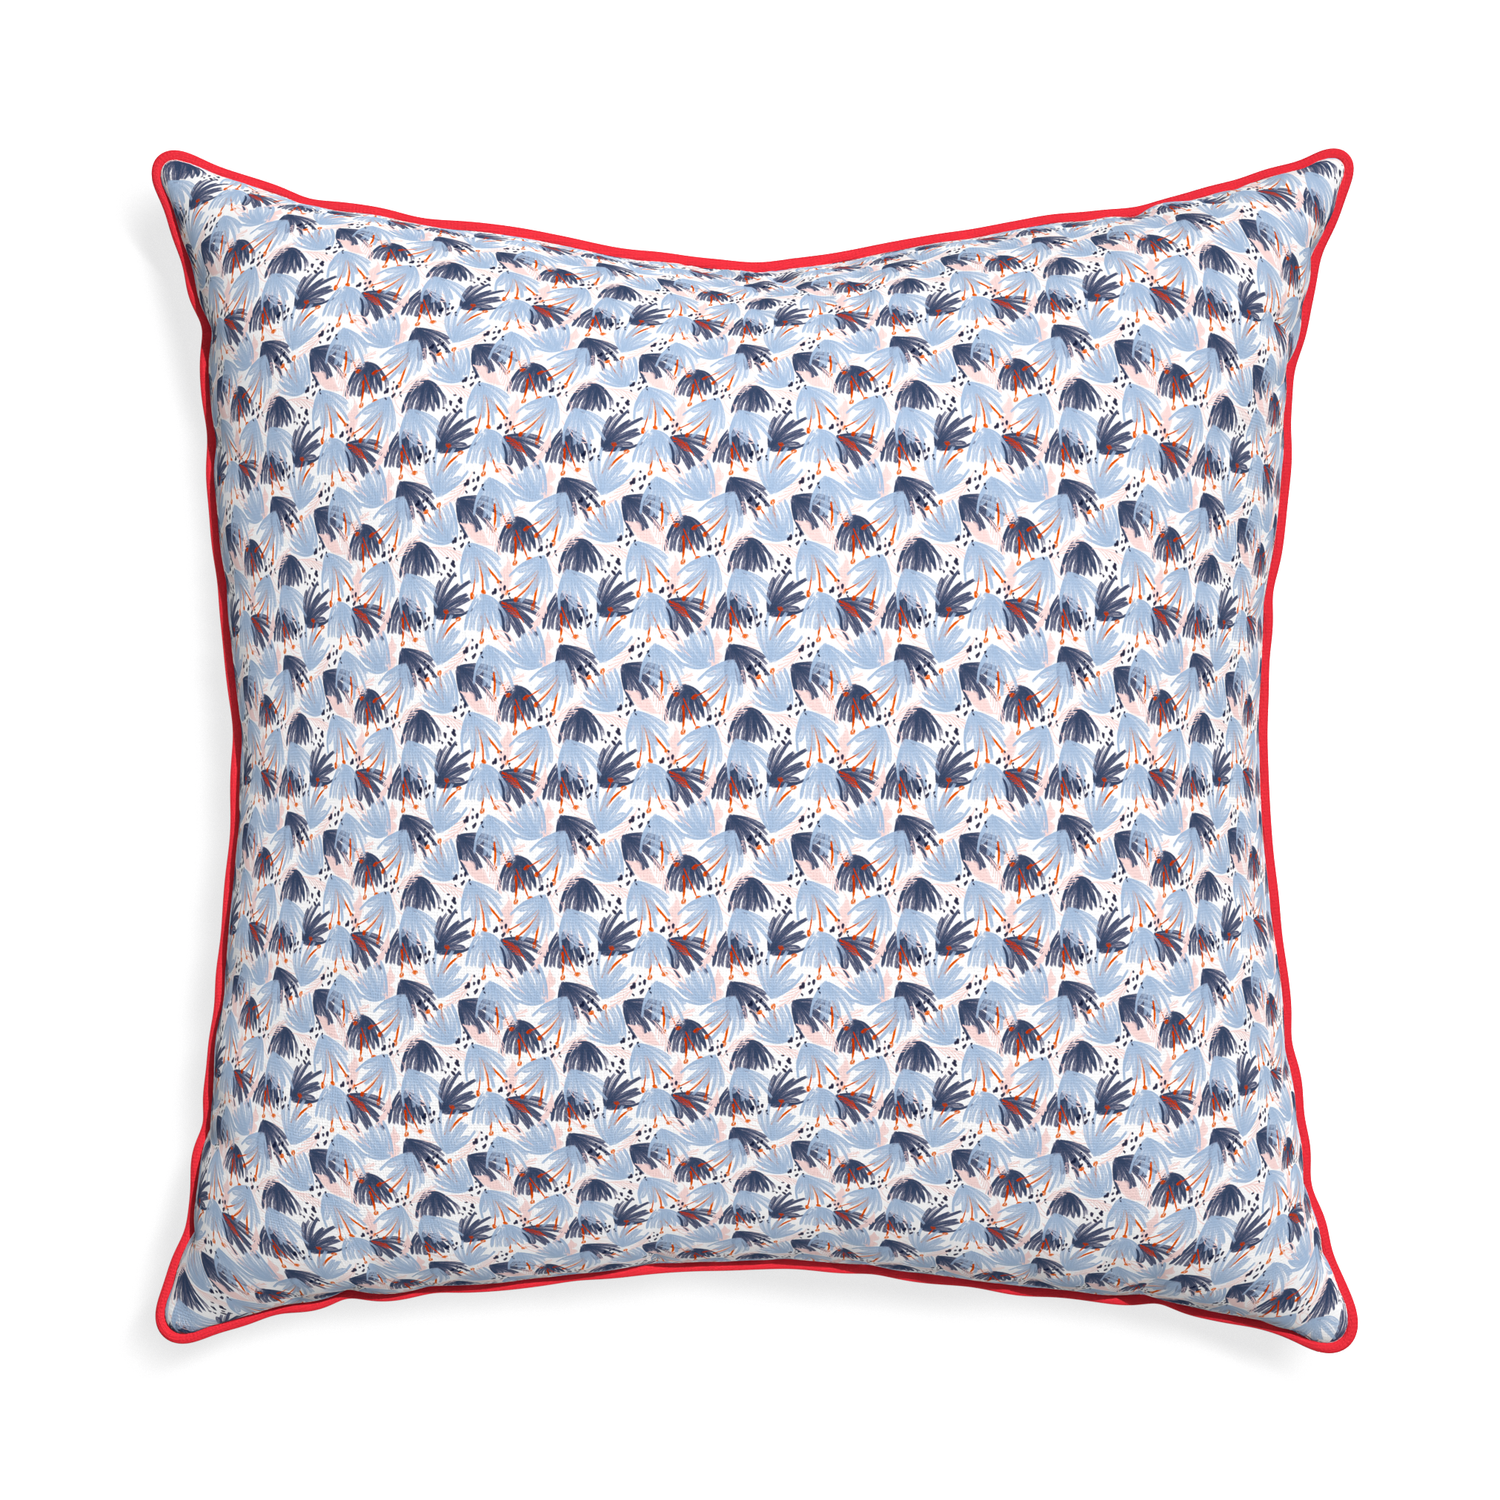 Euro-sham eden blue custom pillow with cherry piping on white background